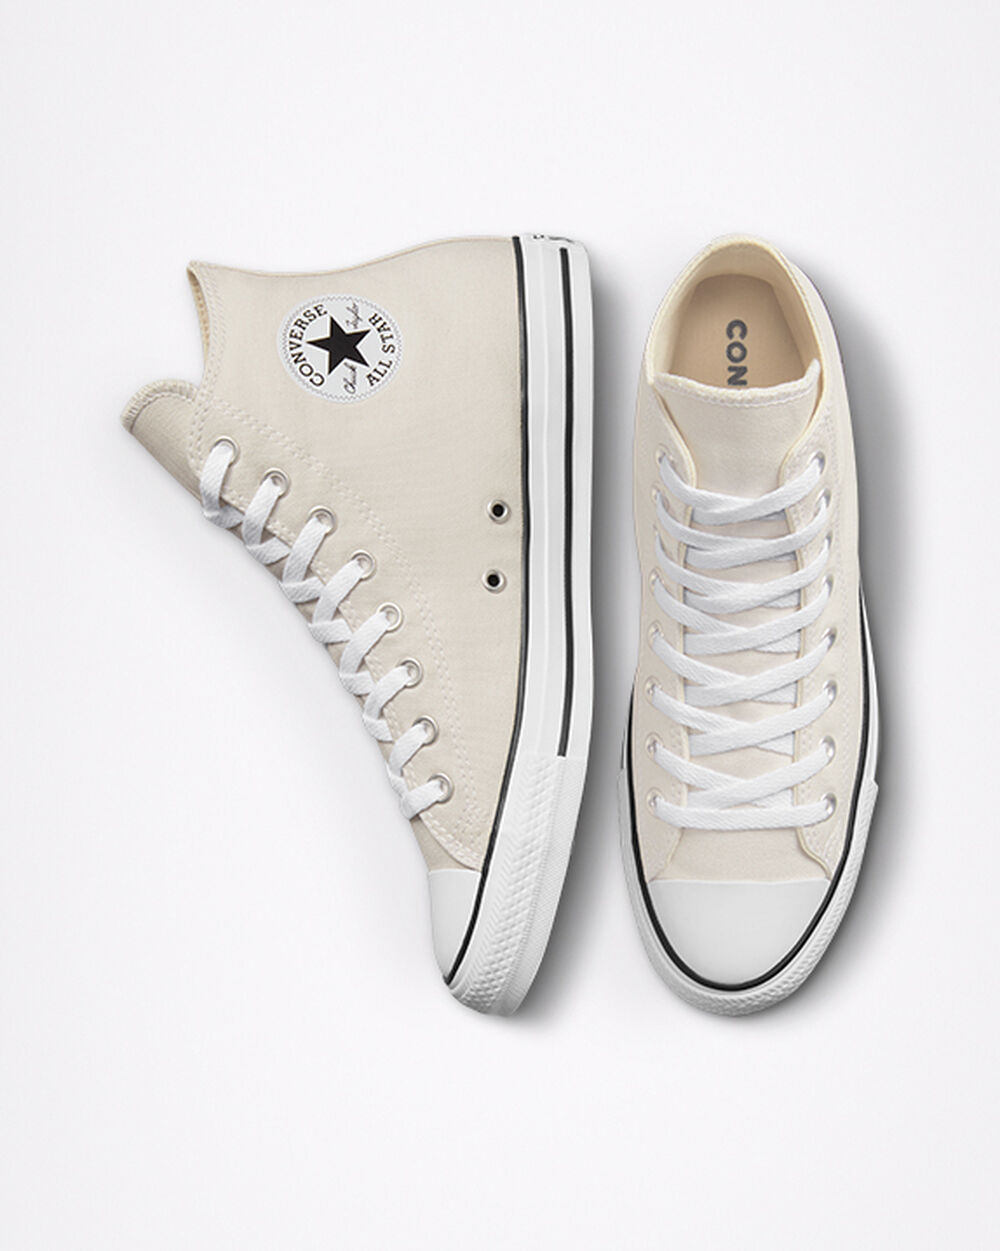 Tenis Converse Chuck Taylor All Star Mujer Beige | Mexico-066256